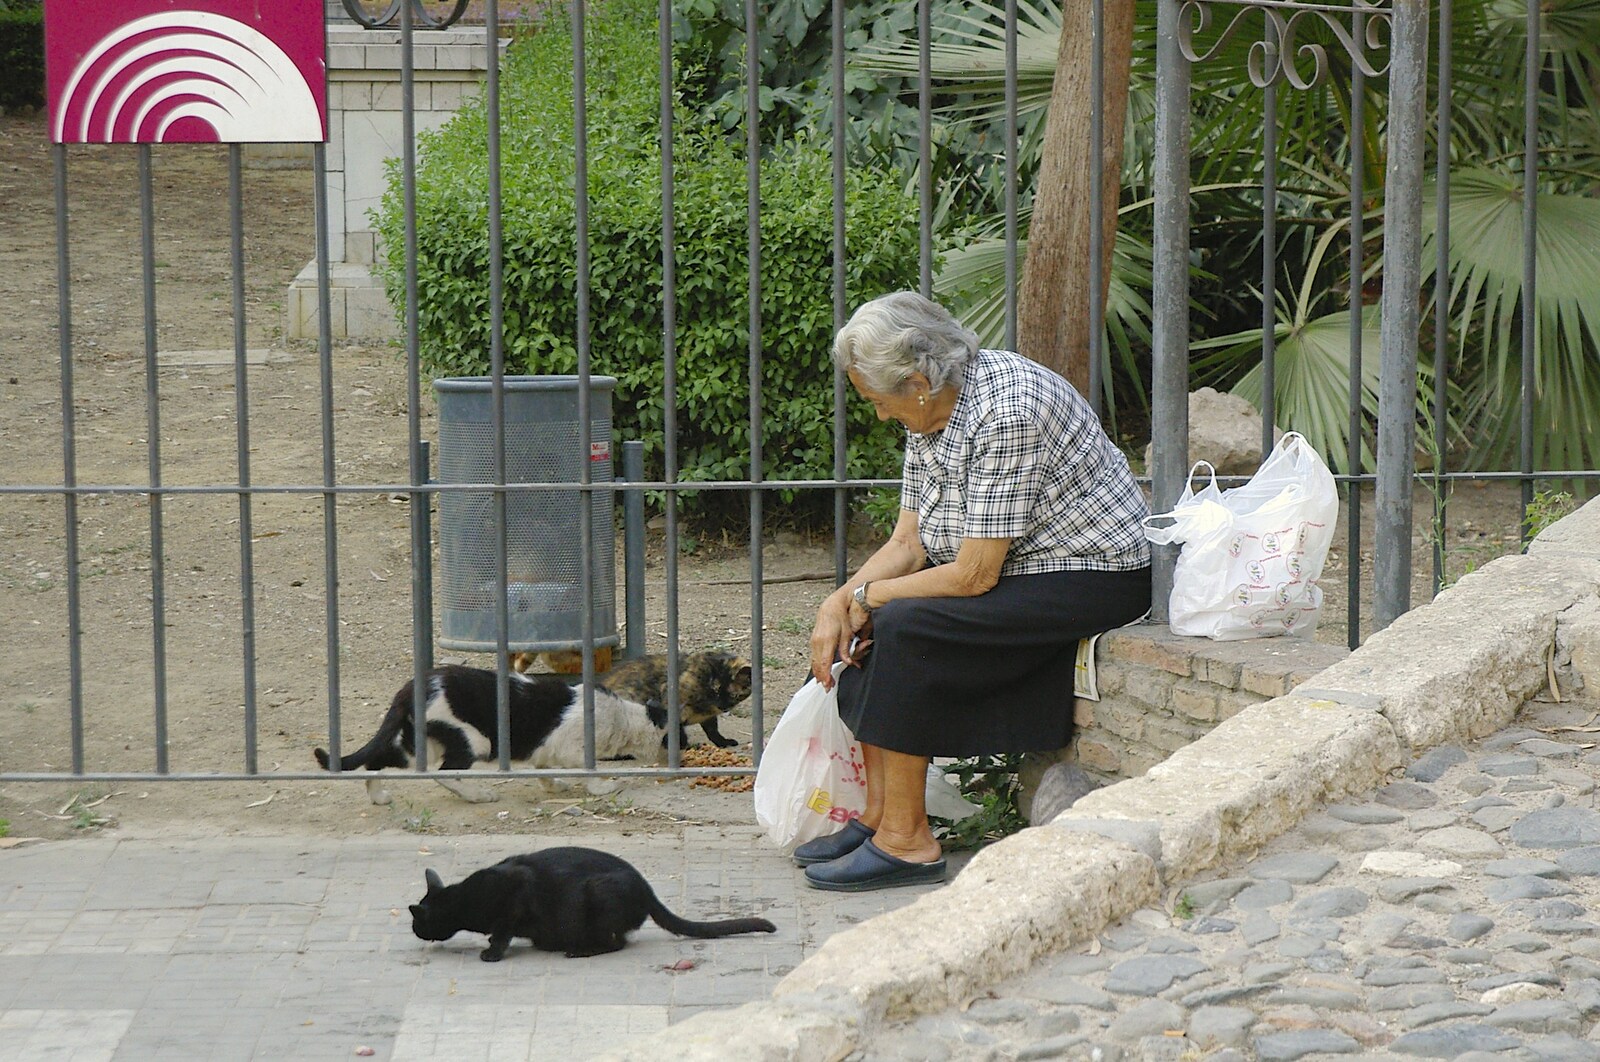 A woman watches the stray cats from Working at Telefónica, Malaga, Spain - 6th June 2006